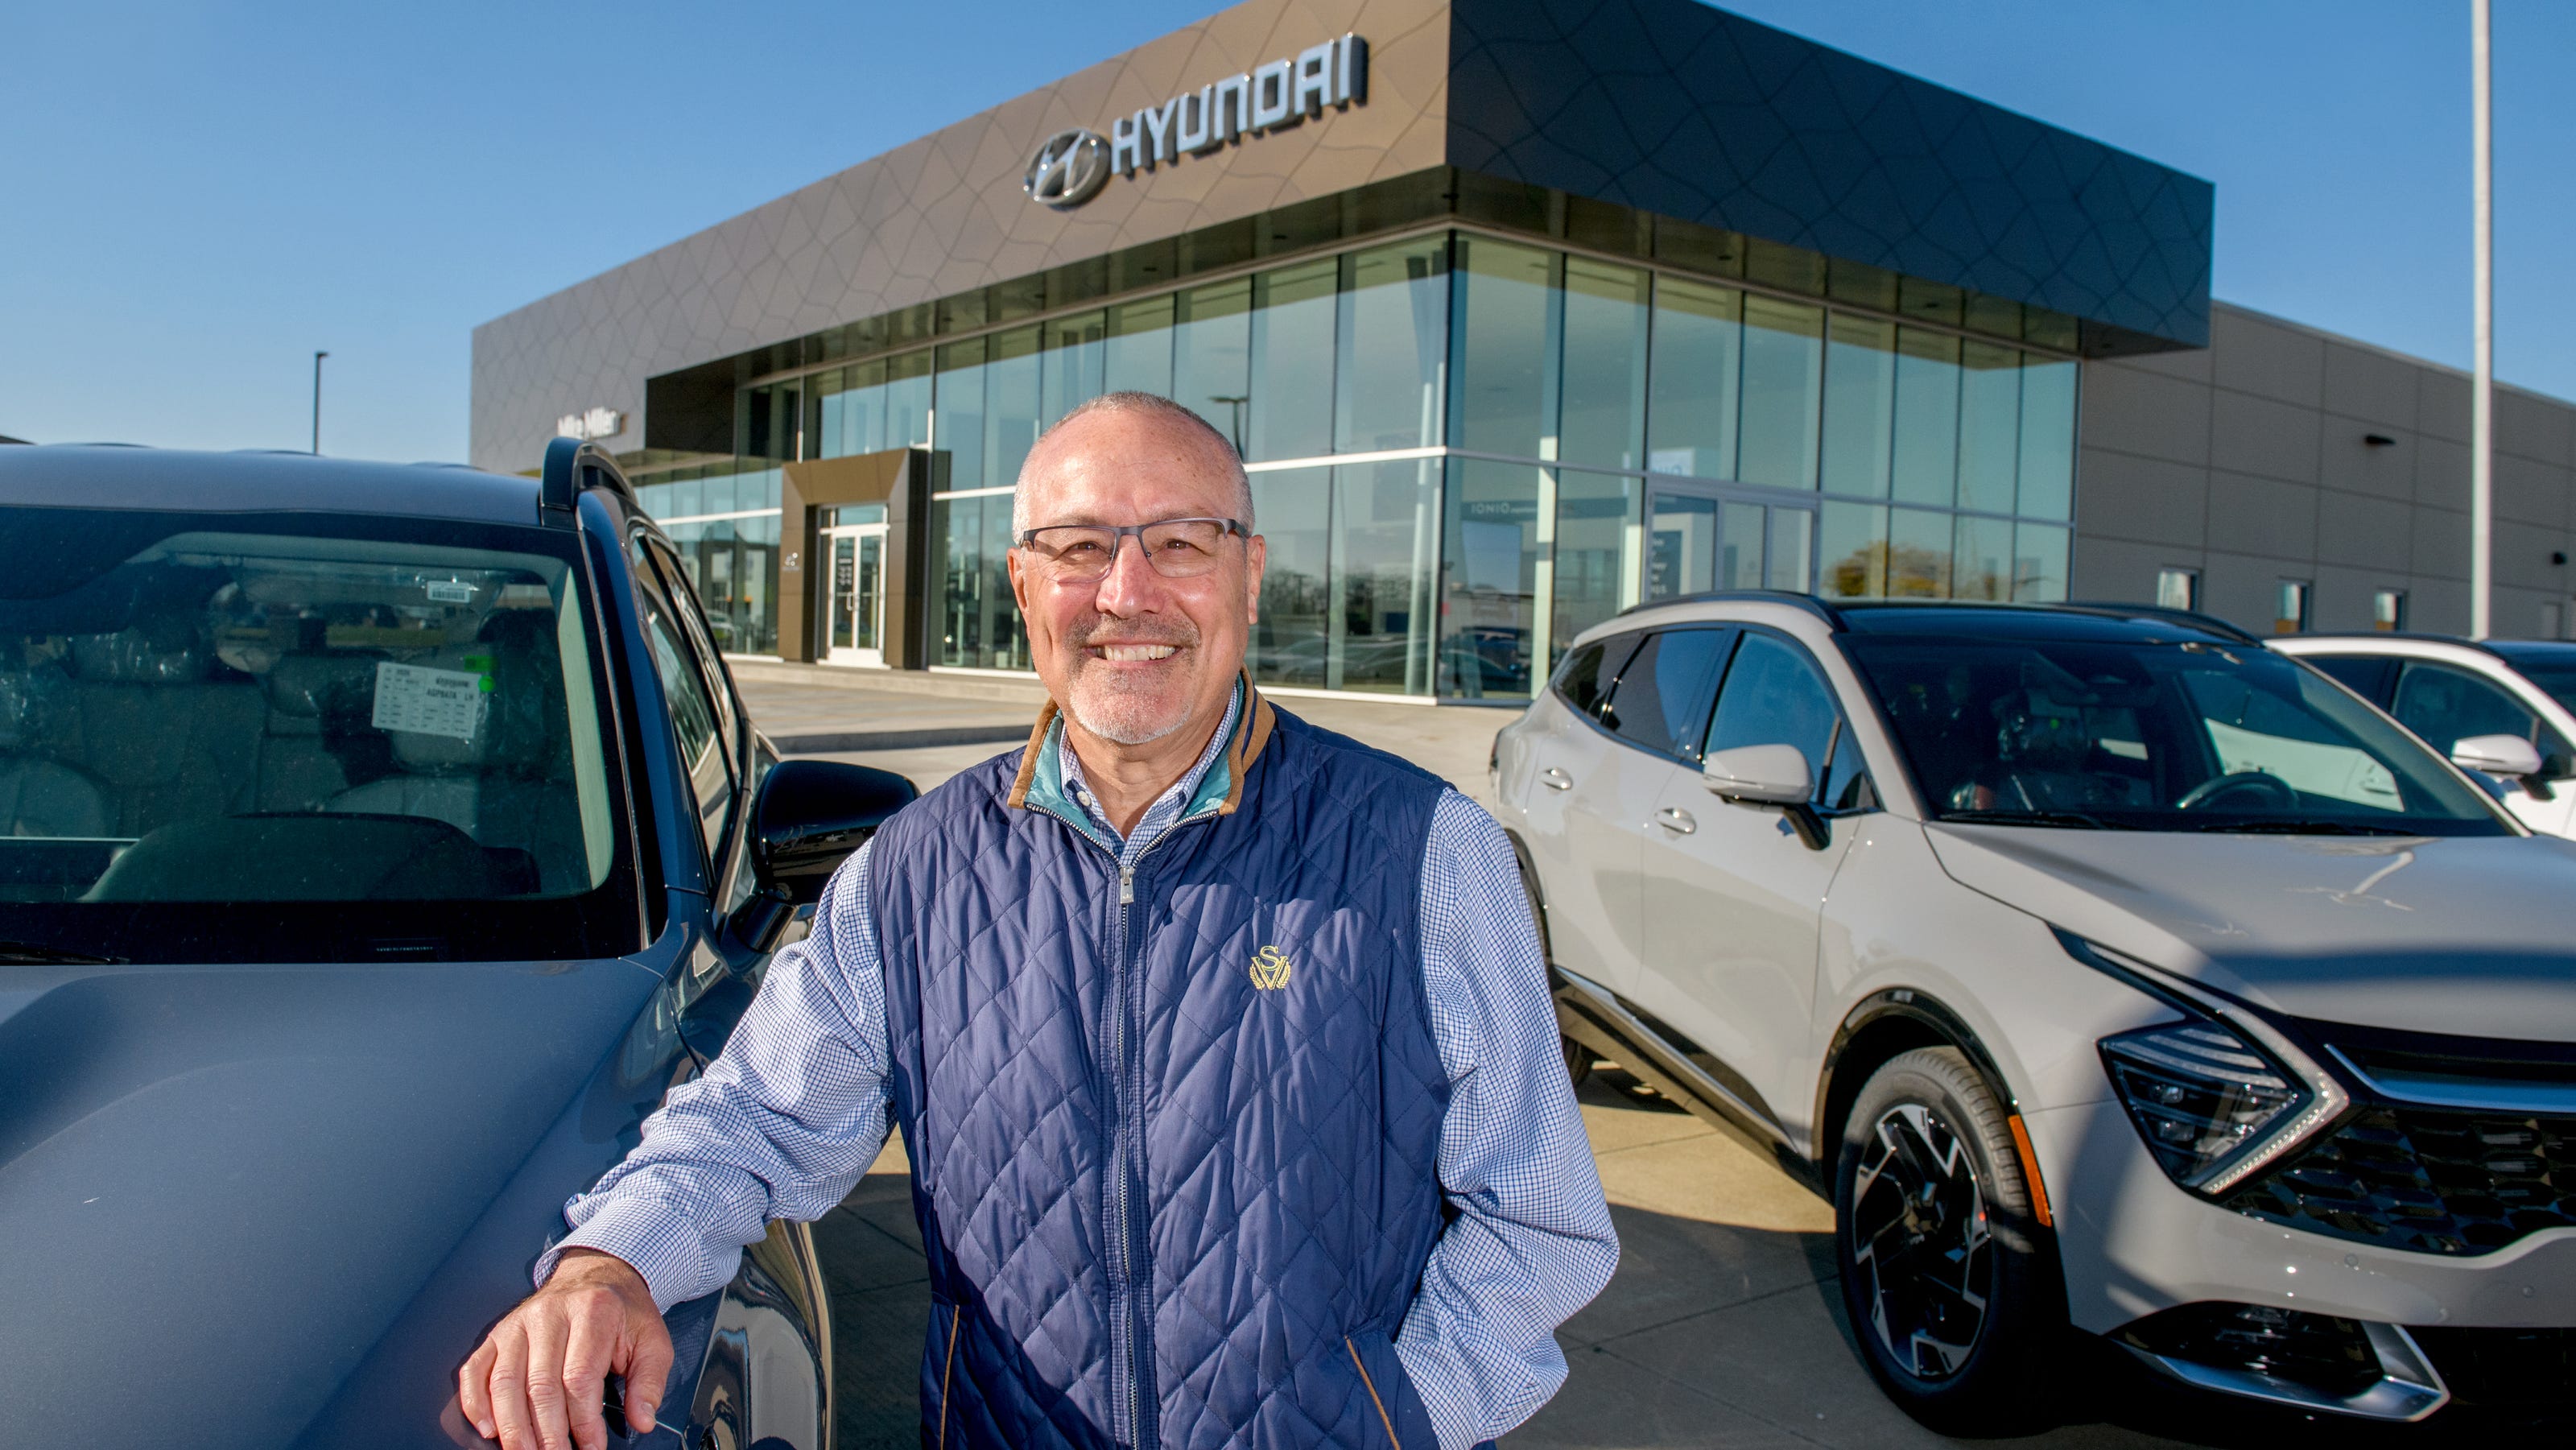   
																With car shortages easing slightly, Peoria businessman opens a new Hyundai dealership in Peoria 
															 